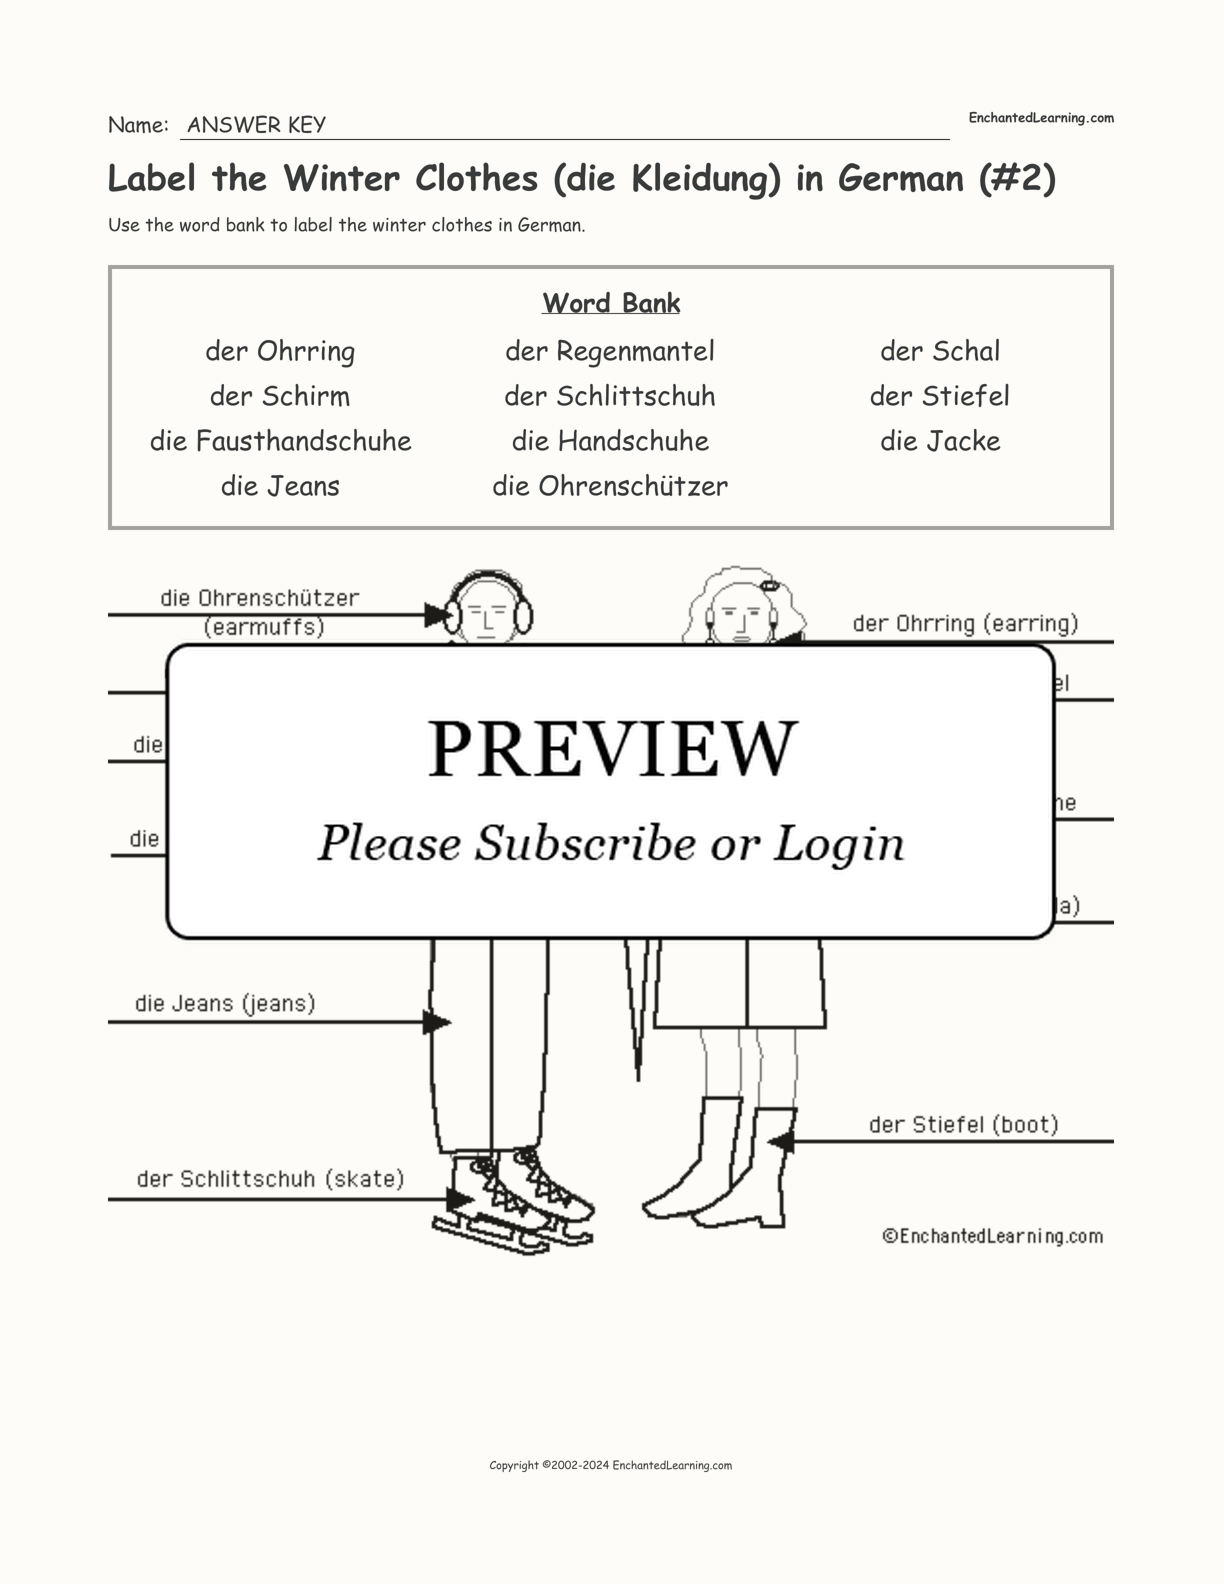 Label the Winter Clothes (die Kleidung) in German (#2) interactive worksheet page 2